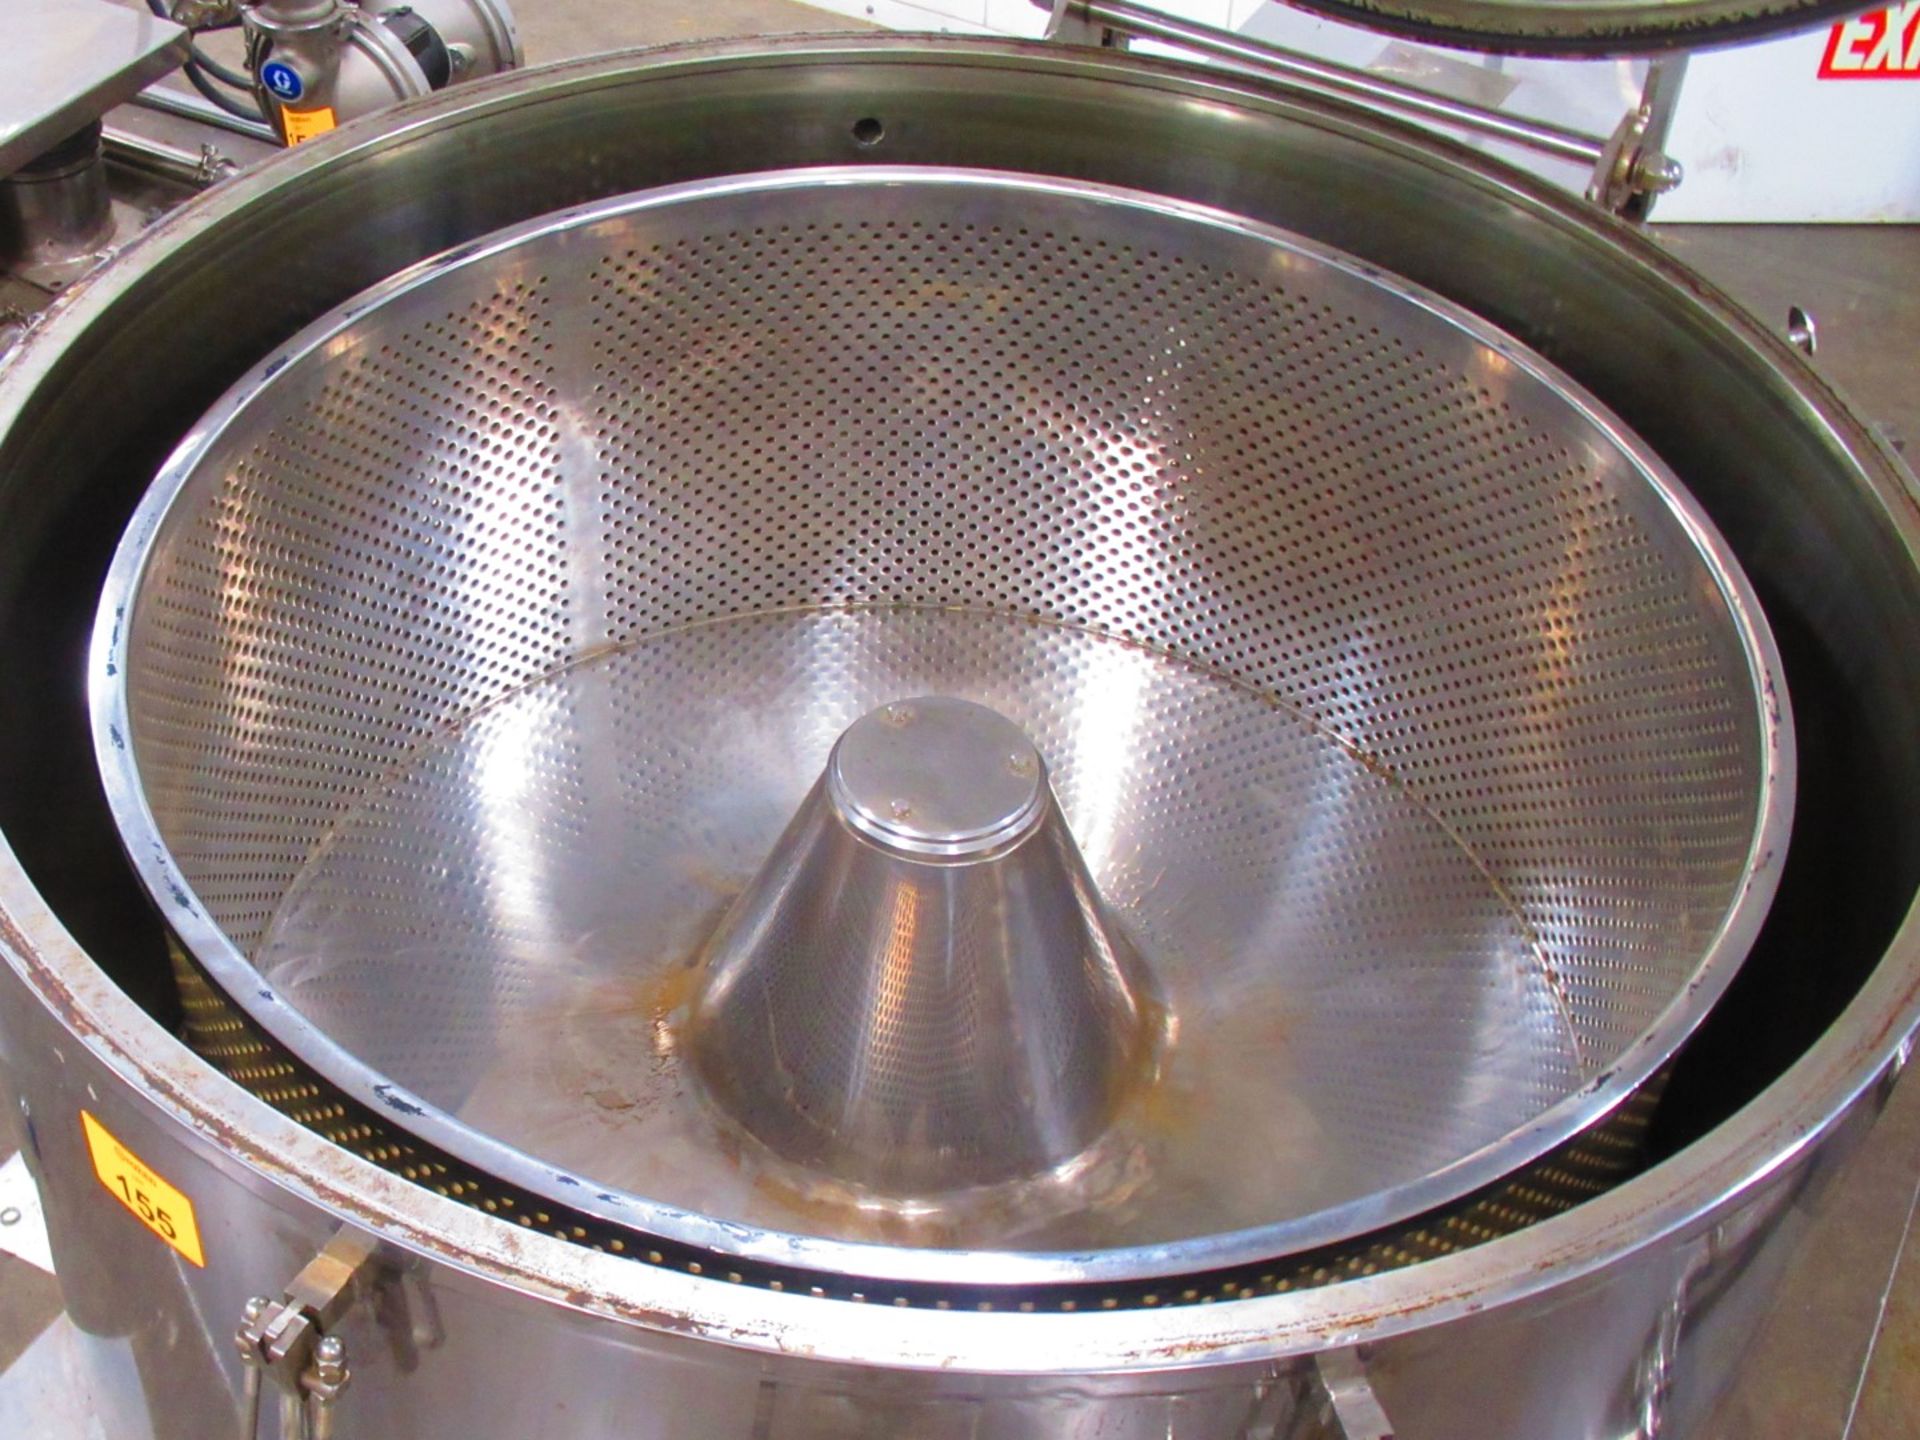 Manual Top Discharge Centrifuge - Image 4 of 10